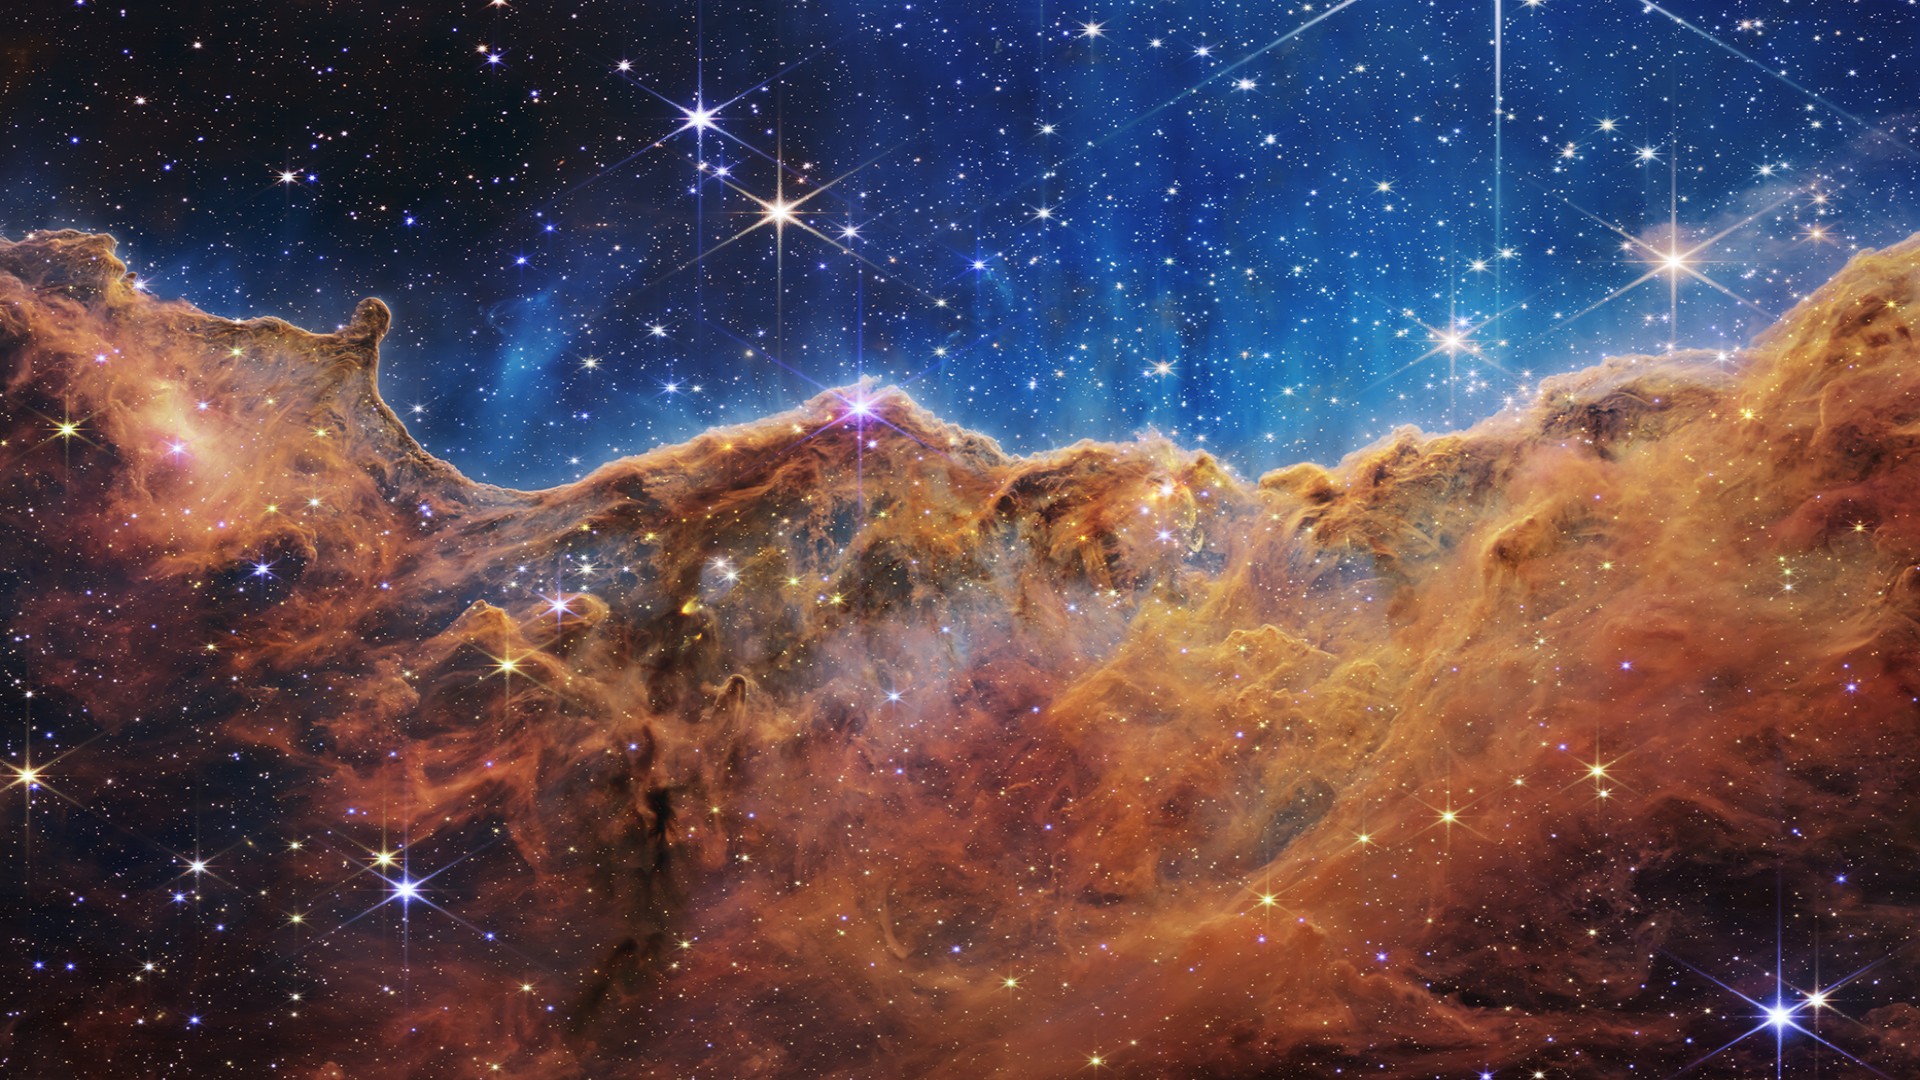 Daily News | Online News A composite image of the Cosmic Cliffs in the Carina Nebula, created with the Webb telescope's NIRCam and MIRI instruments.